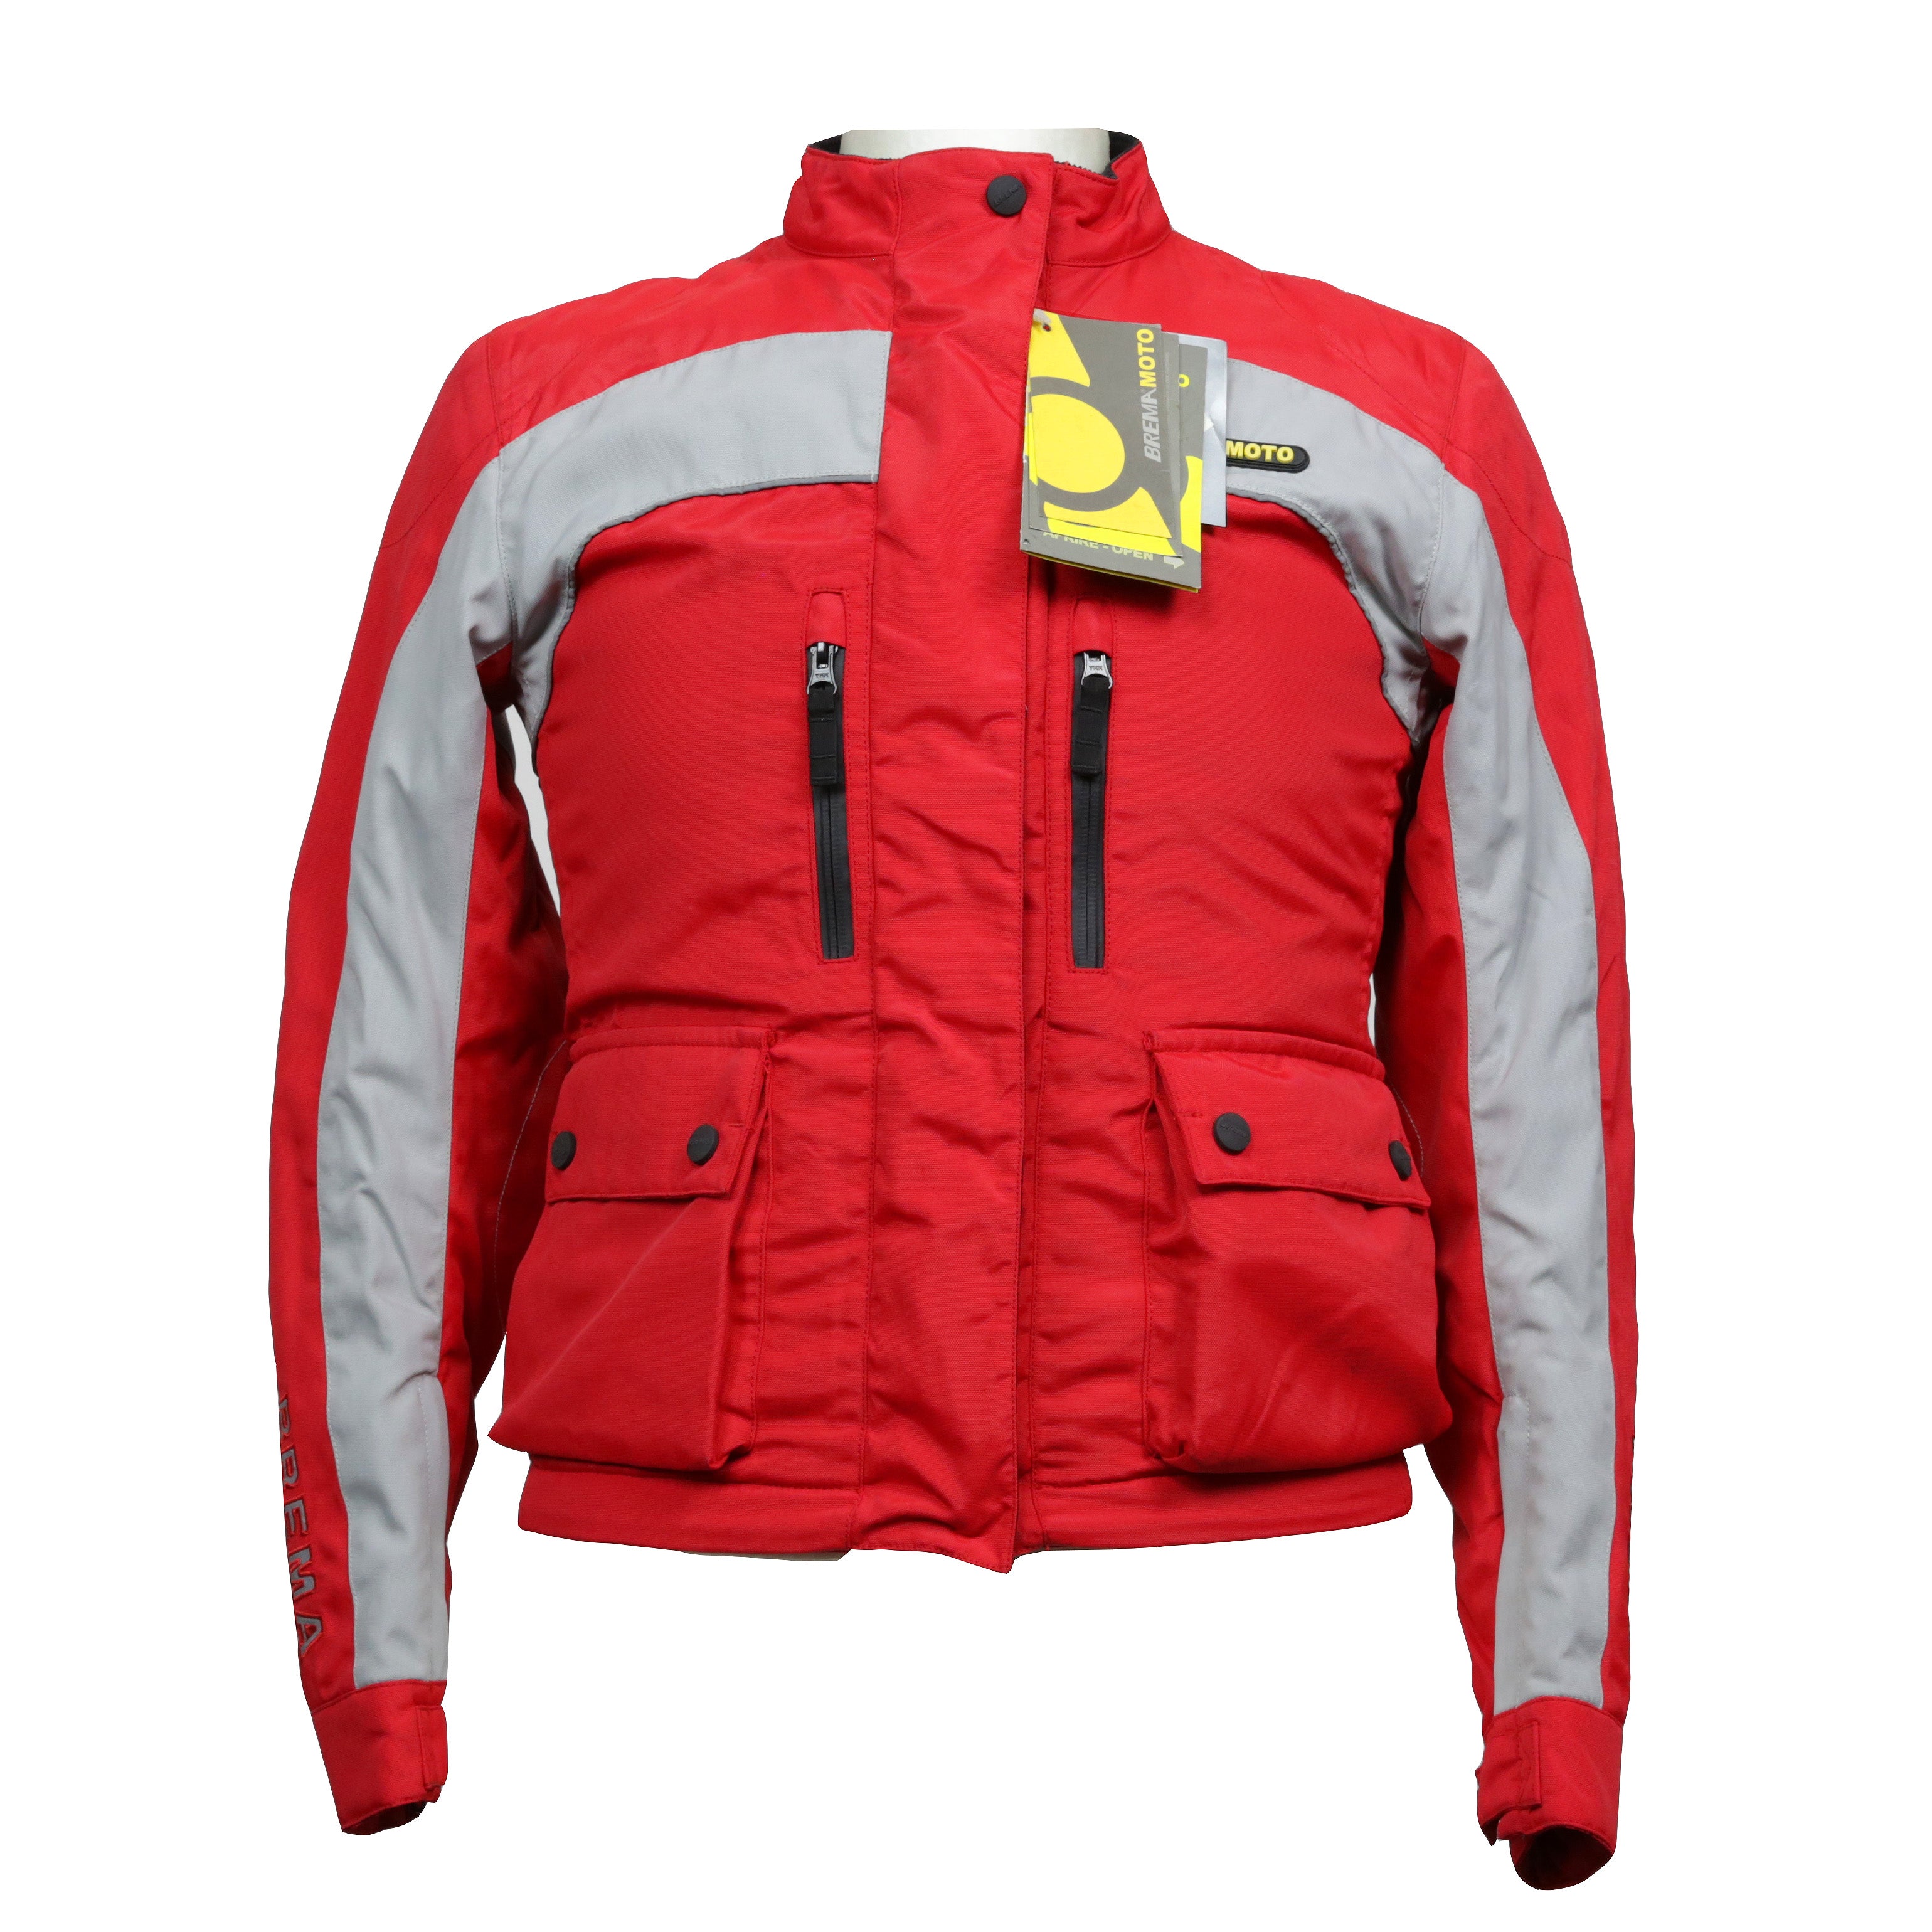 Brema Women's Motorcycle Touring Jacket - Red